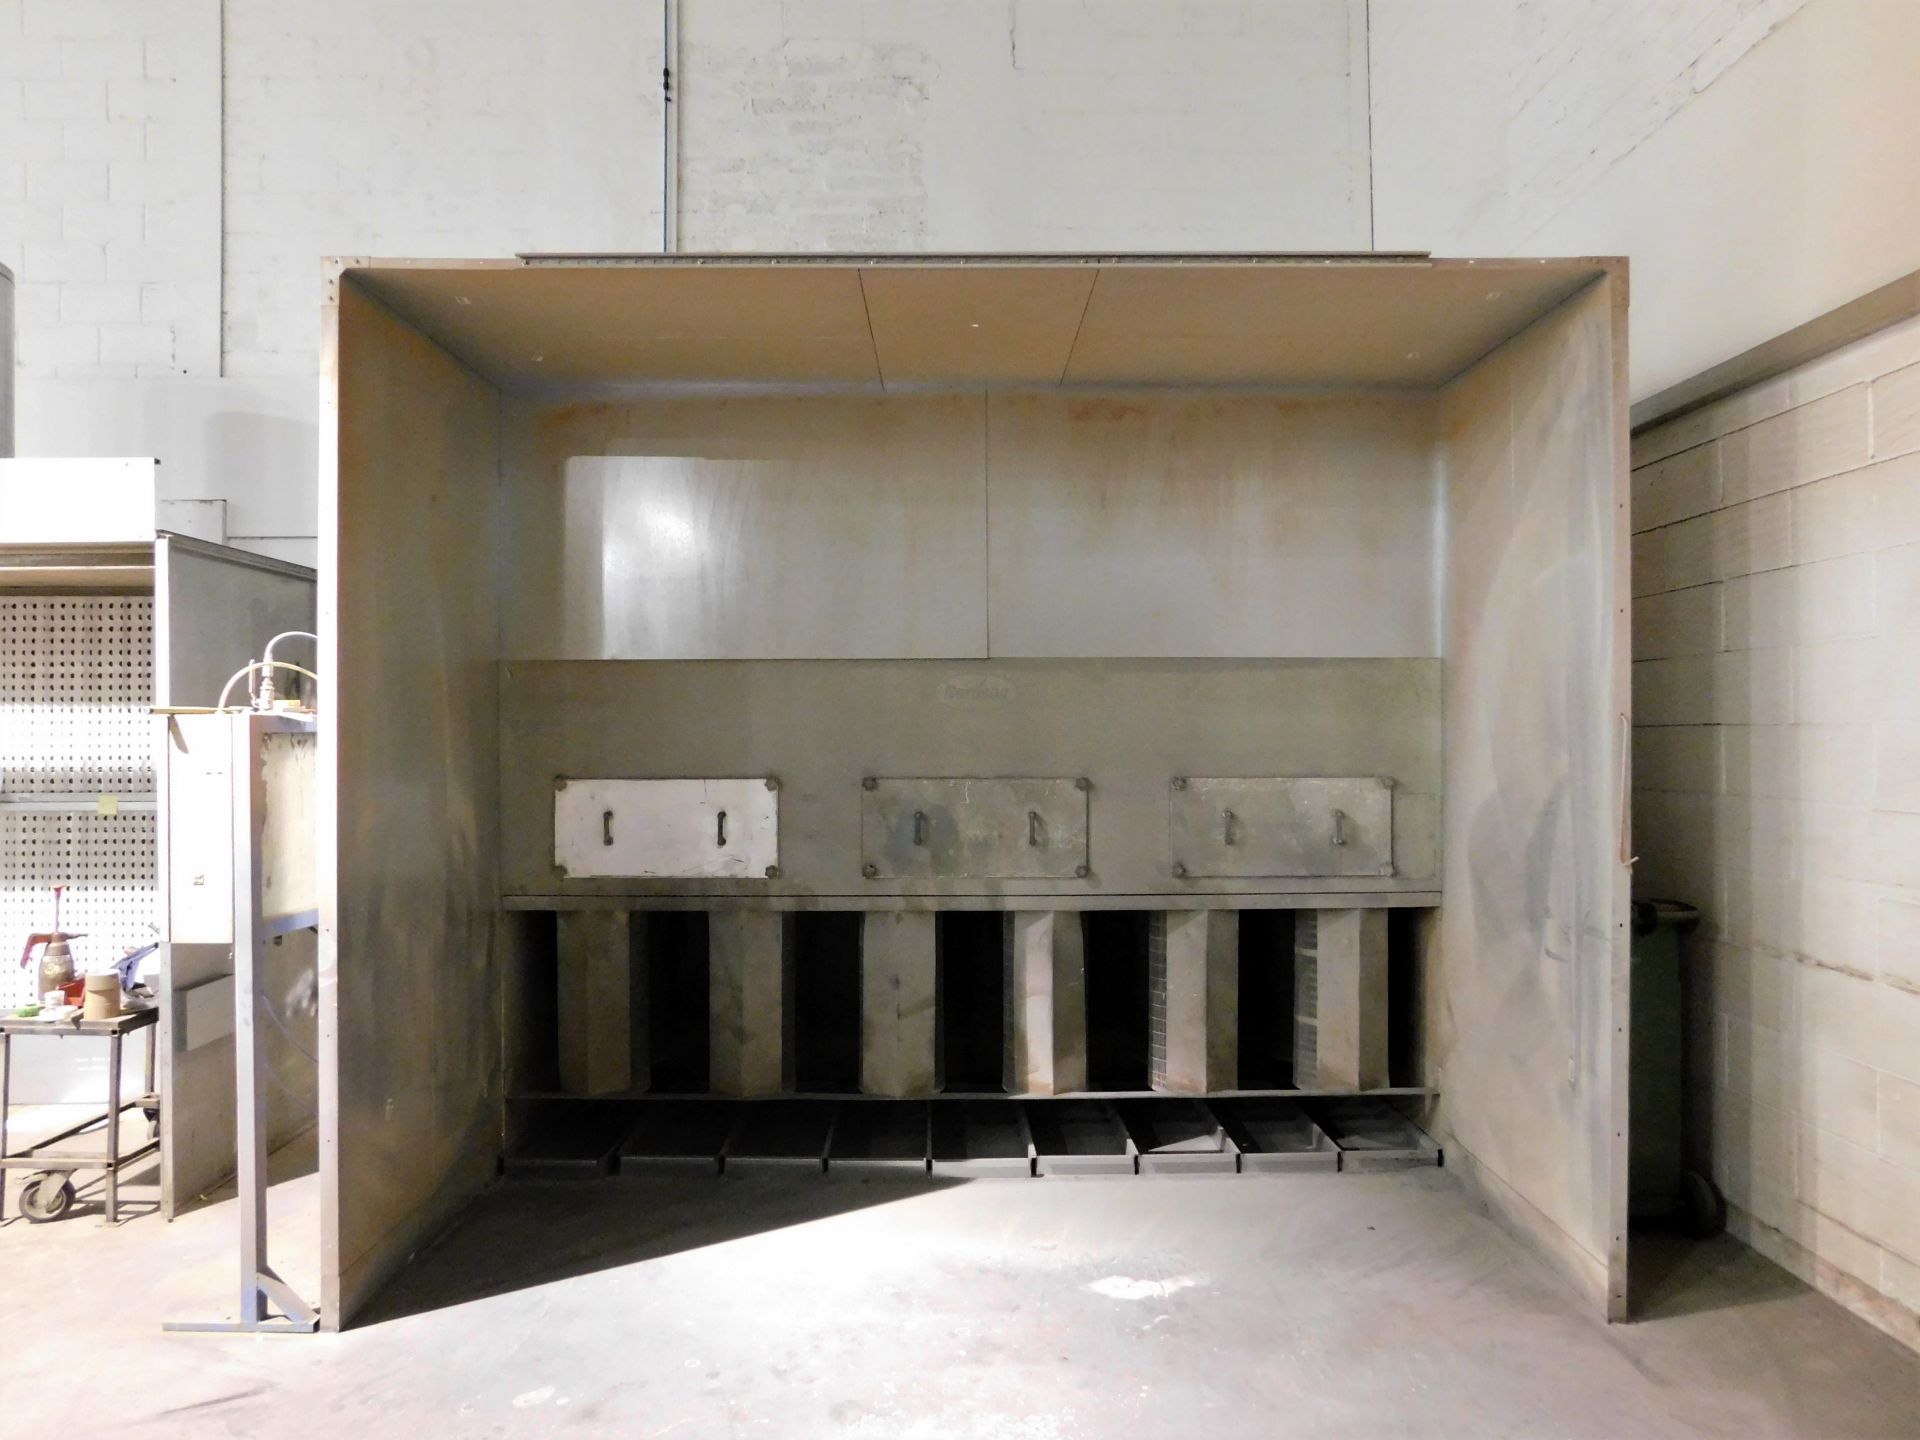 Nordson Dryback Spray Booth with Extraction Fan & Electrical Control Cabinet